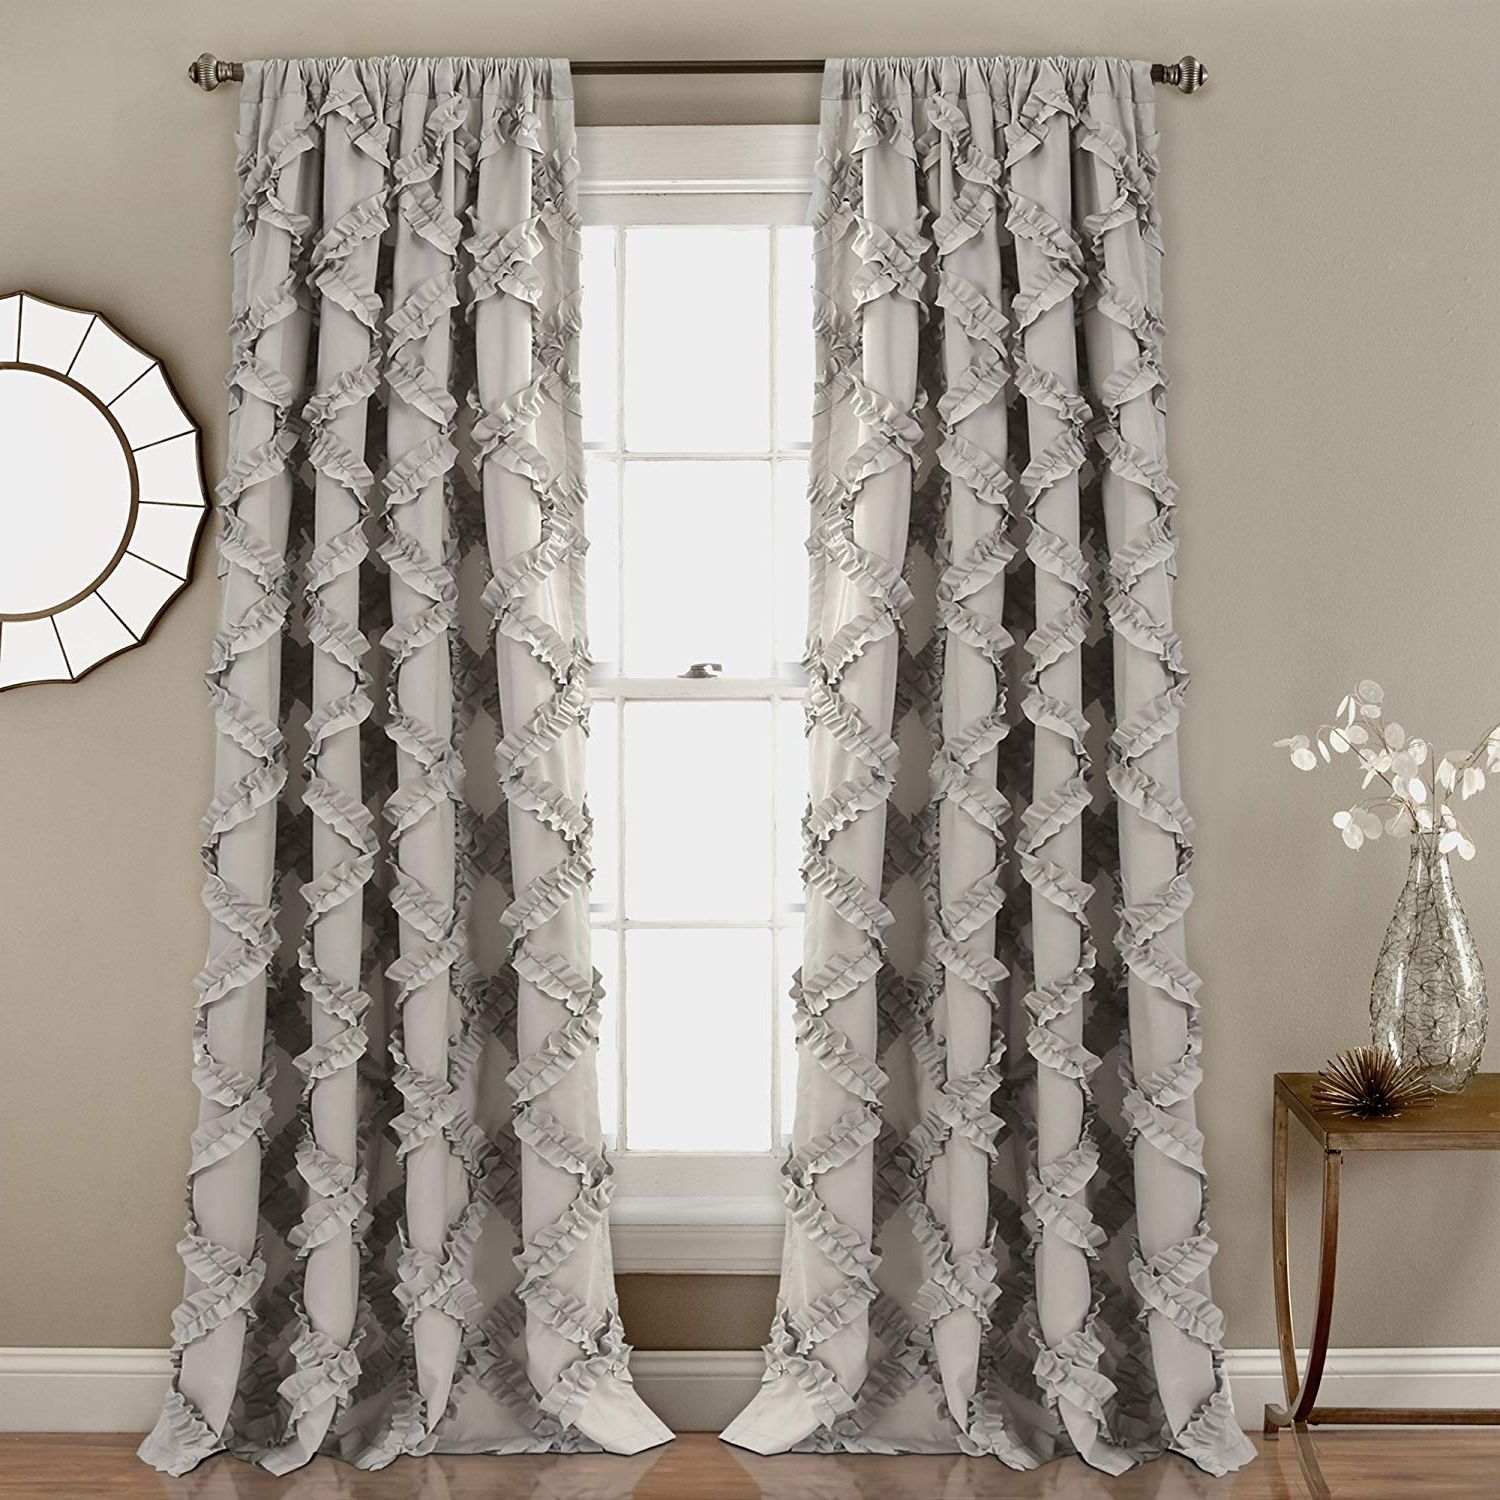 Well Liked Lush Decor Ruffle Diamond Curtains Textured Window Panel Set For Living,  Dining Room, Bedroom (pair), 84” X 54”, Gray Intended For Ruffle Diamond Curtain Panel Pairs (View 1 of 20)